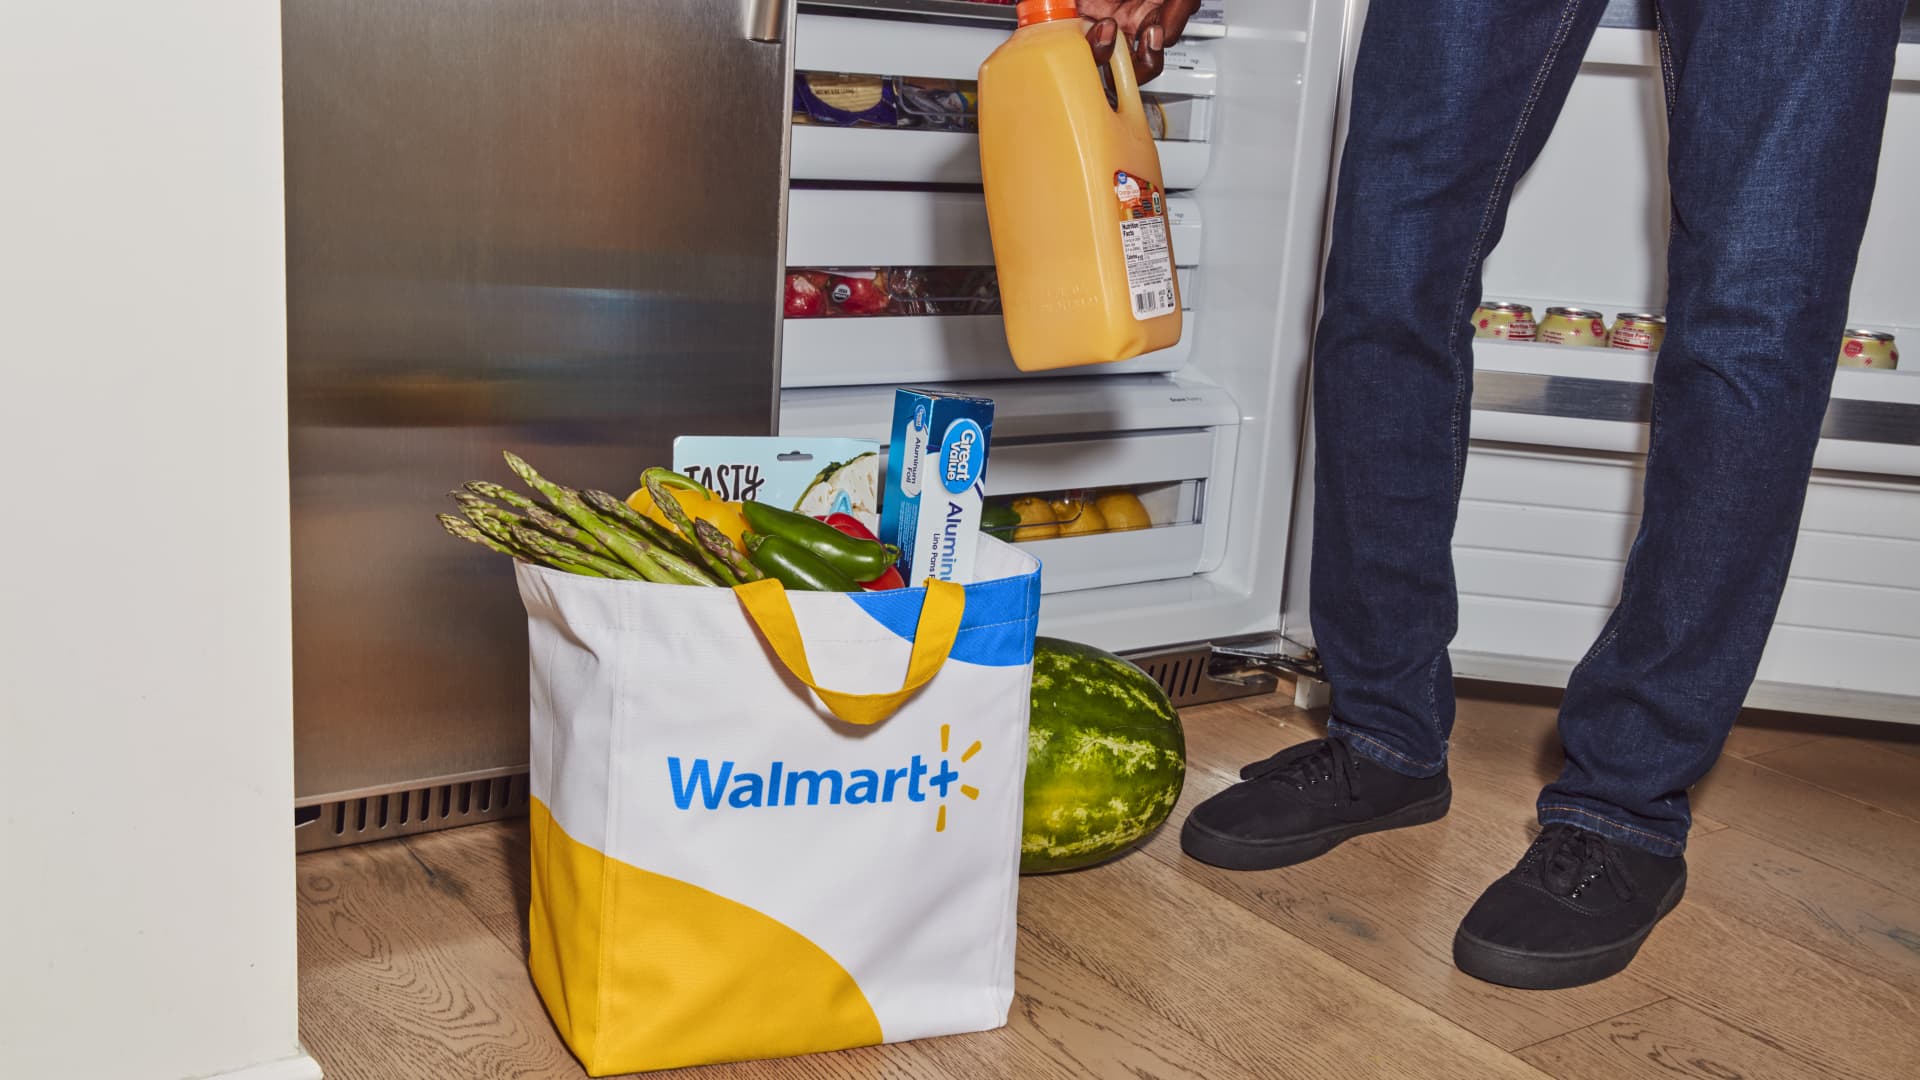 Walmart launched its subscription service, Walmart+ in 2020. It has added perks, including deeper gas discounts and free access to Paramount+.